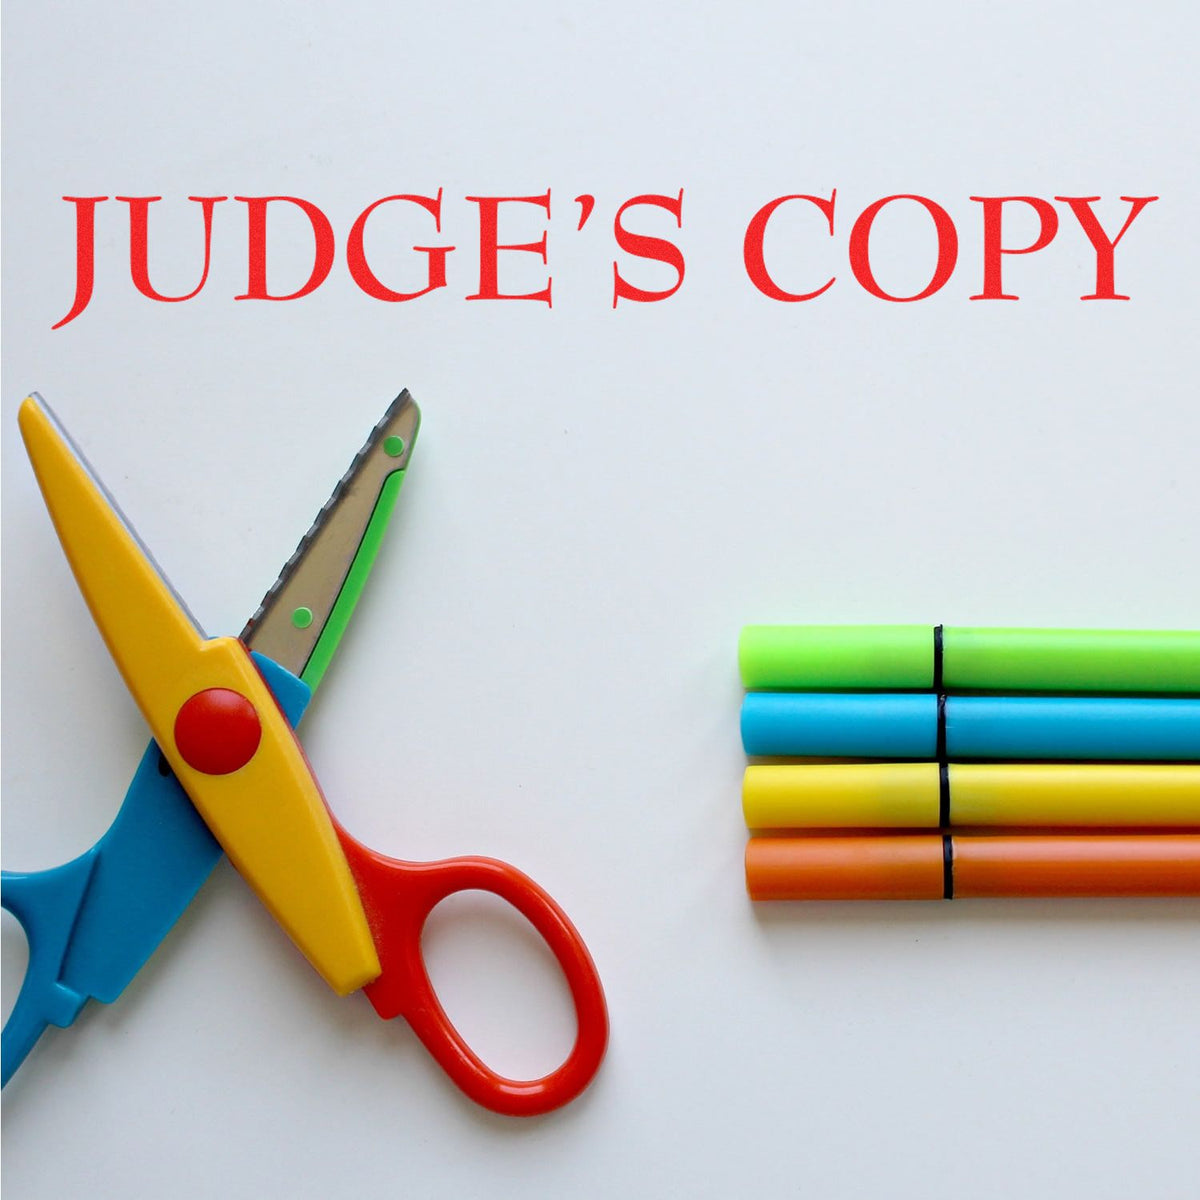 Judges Copy Legal Rubber Stamp In Use Photo